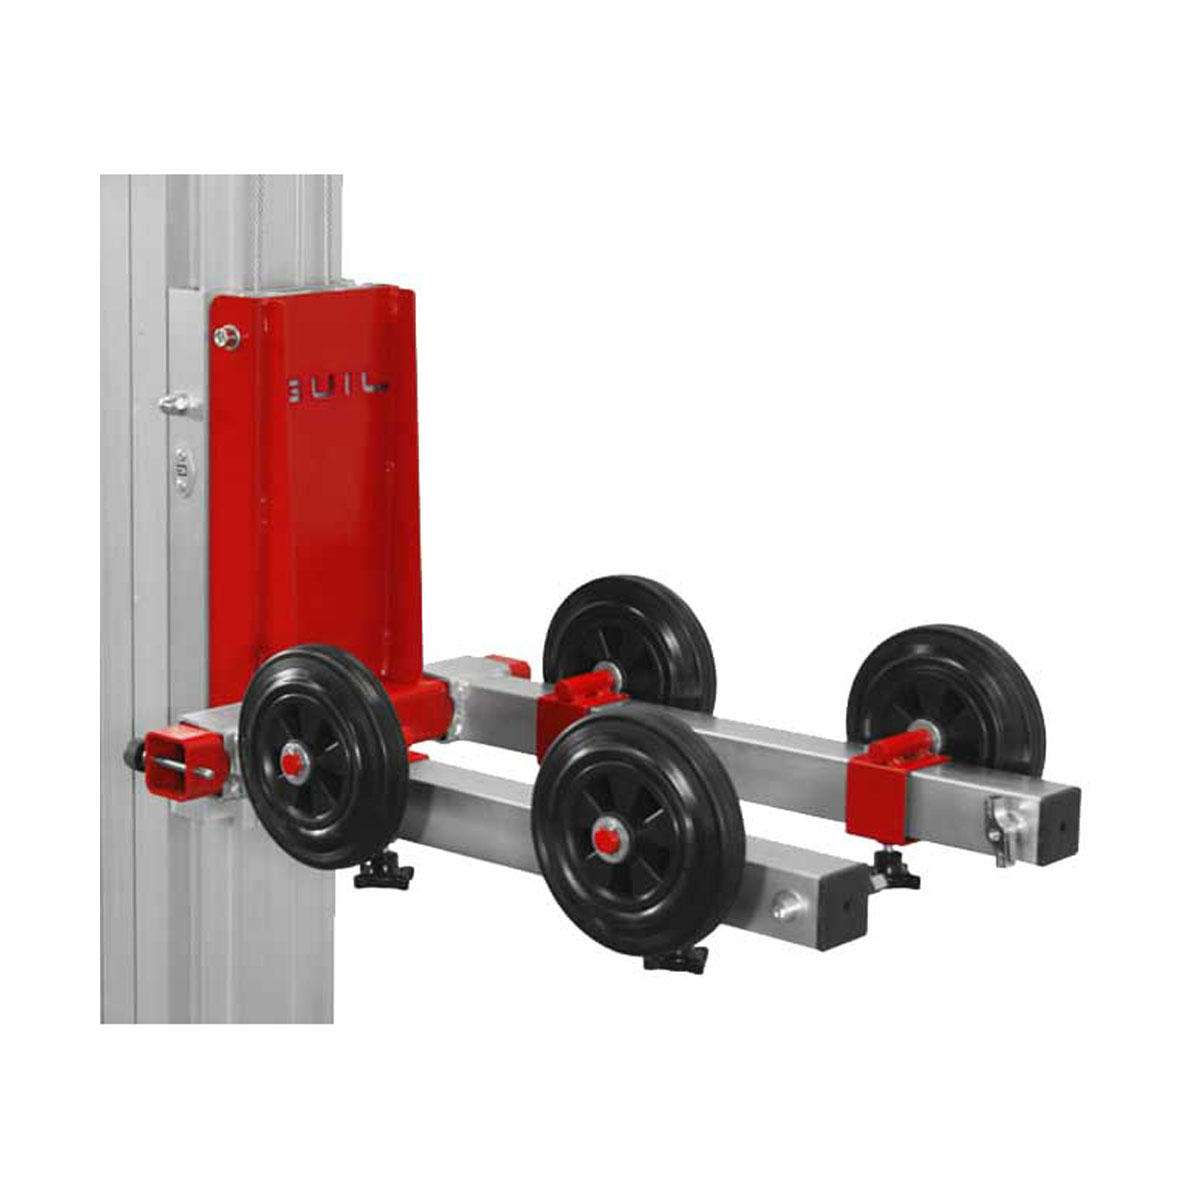 Buy Roller Door Adaptor for GUIL Lift Equipment in Utility Lifters | Materials Handling Lift Towers from GUIL available at Astrolift NZ